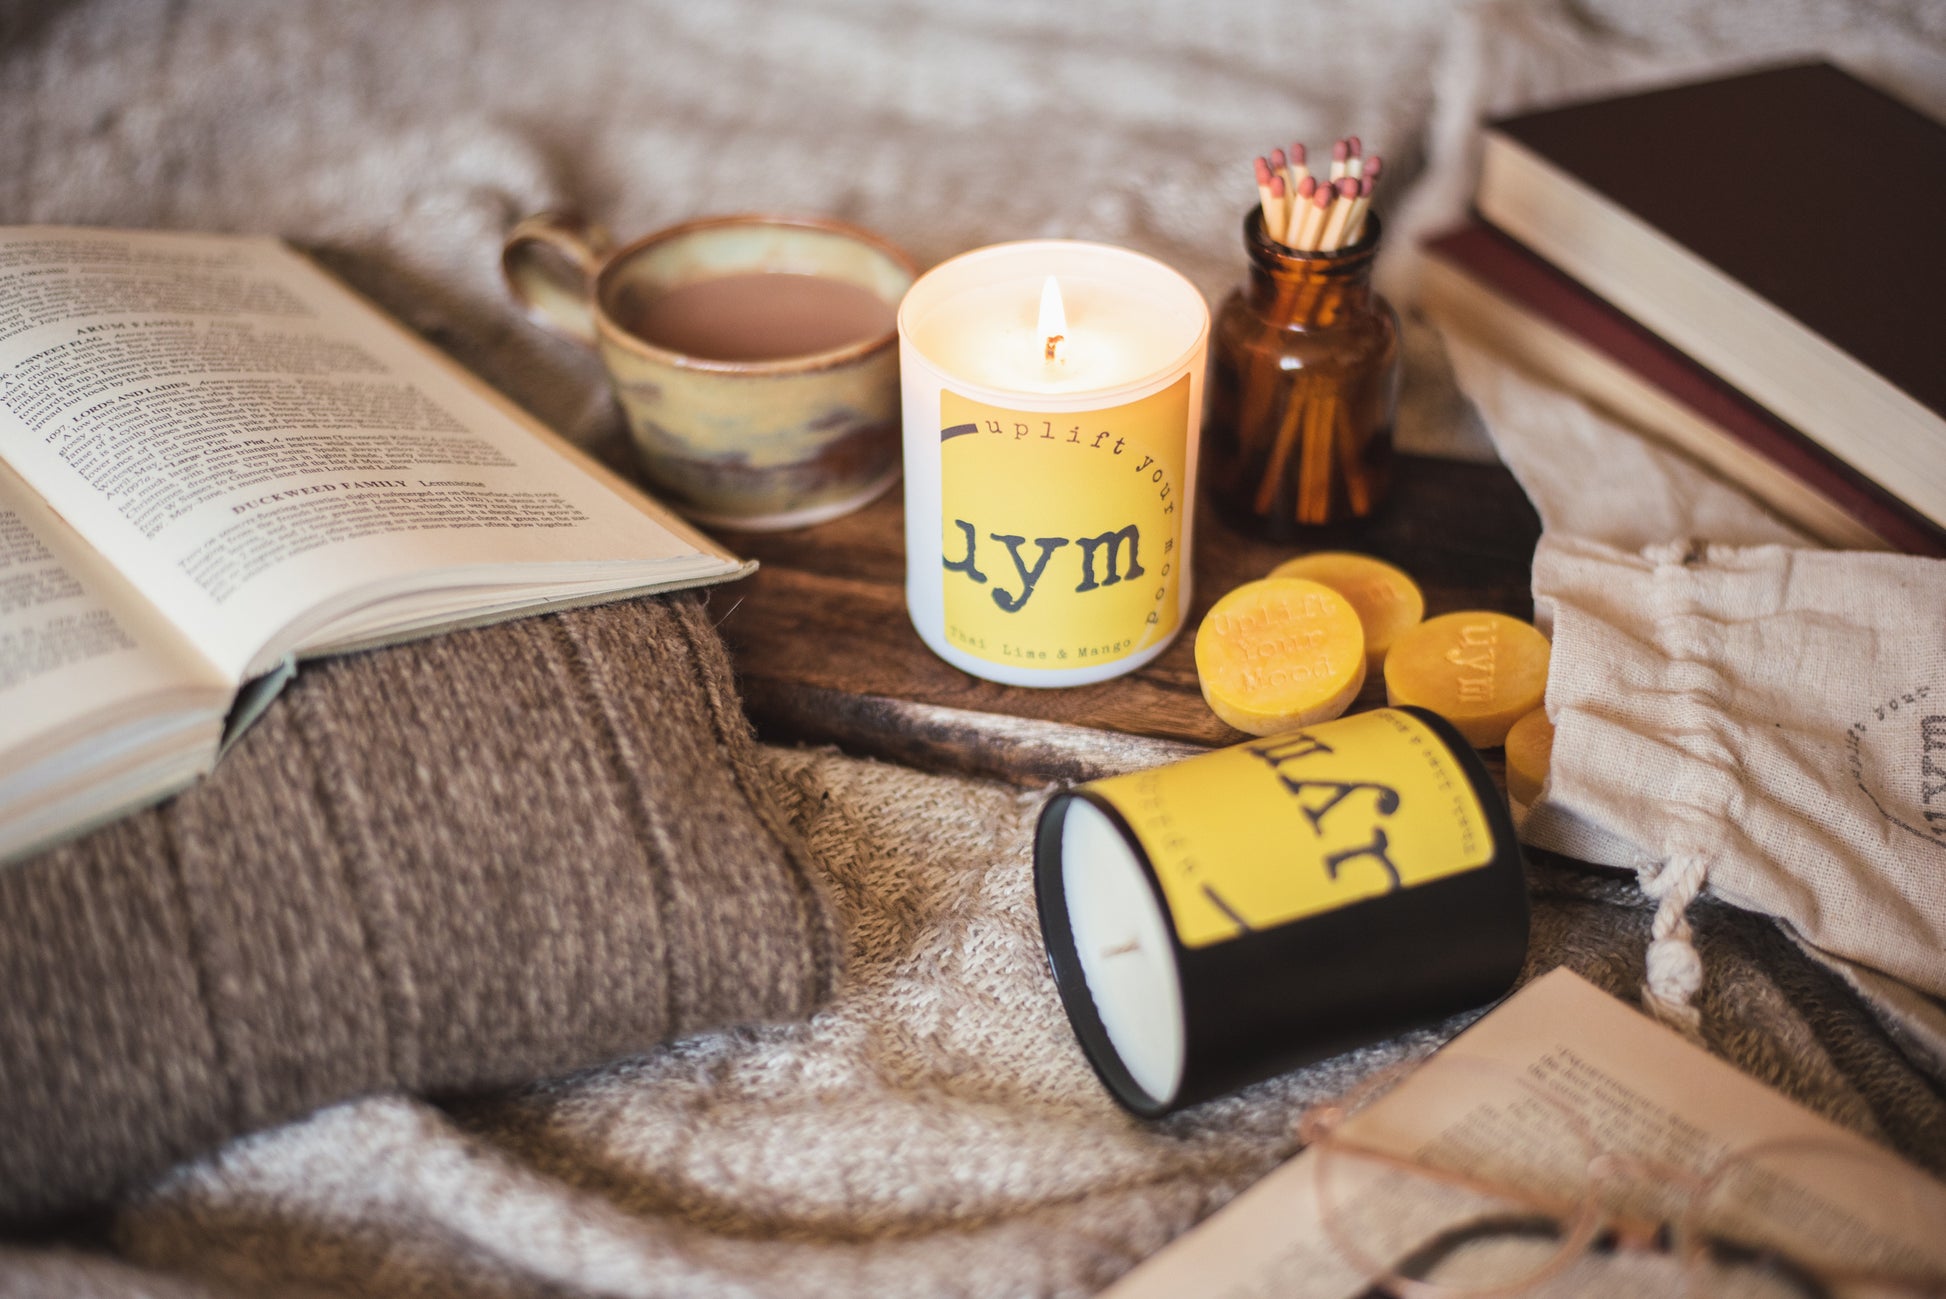 Thai Lime and Mango natural wax candle,matt black candle, matt white glass jar candle lighted, natural wax melts yellow in a cotton bag, books and a nice cup of tea, cosy atmosphere, Uplift Your Mood Scents